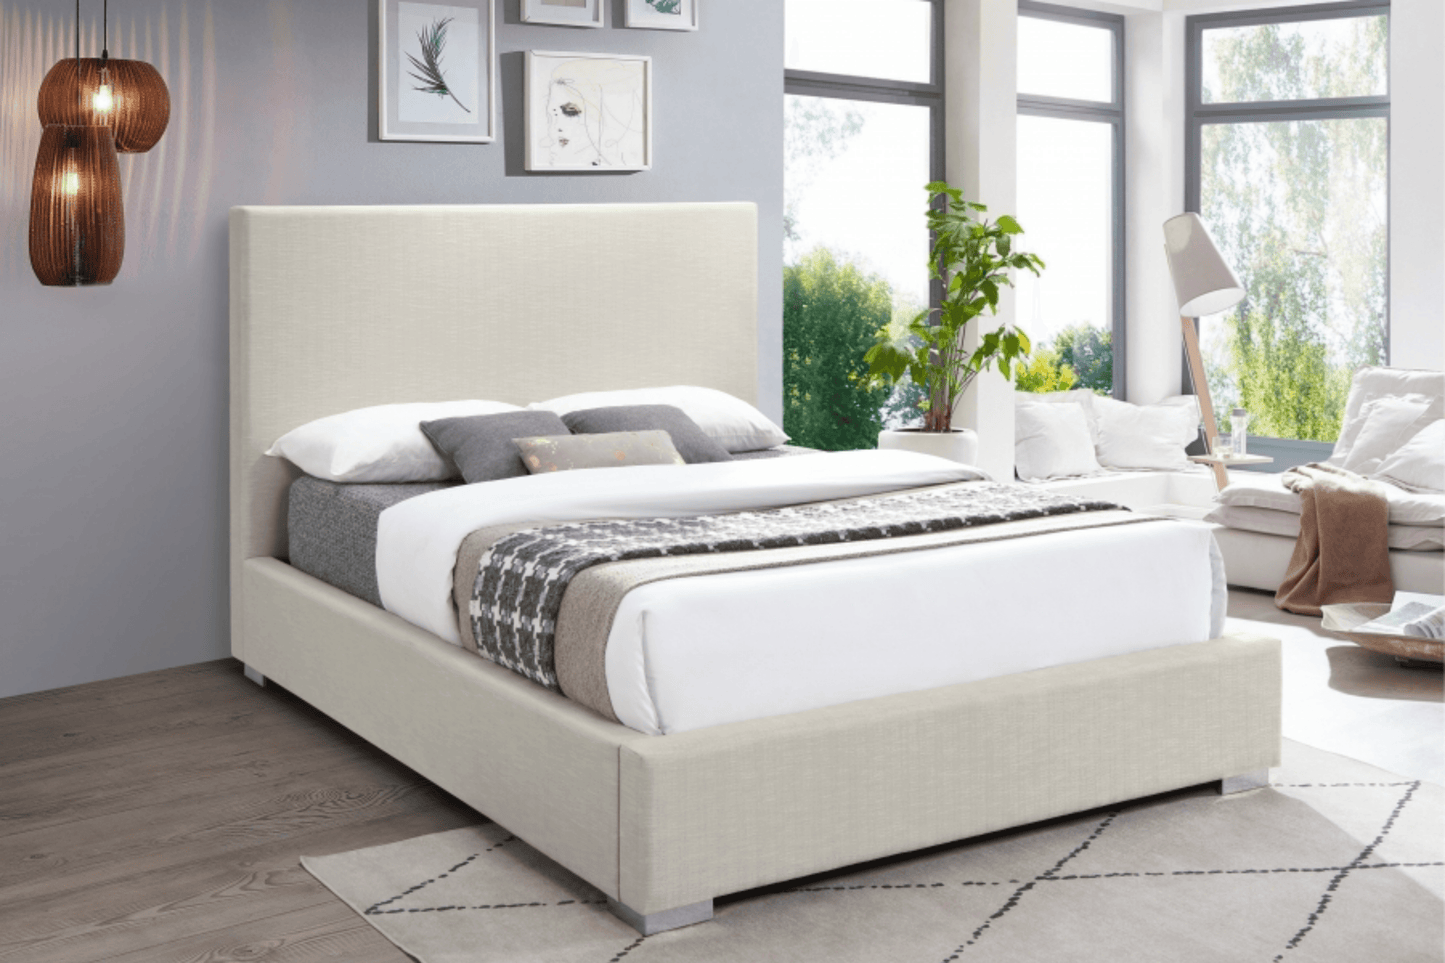 Classic beige bed for your bedroom